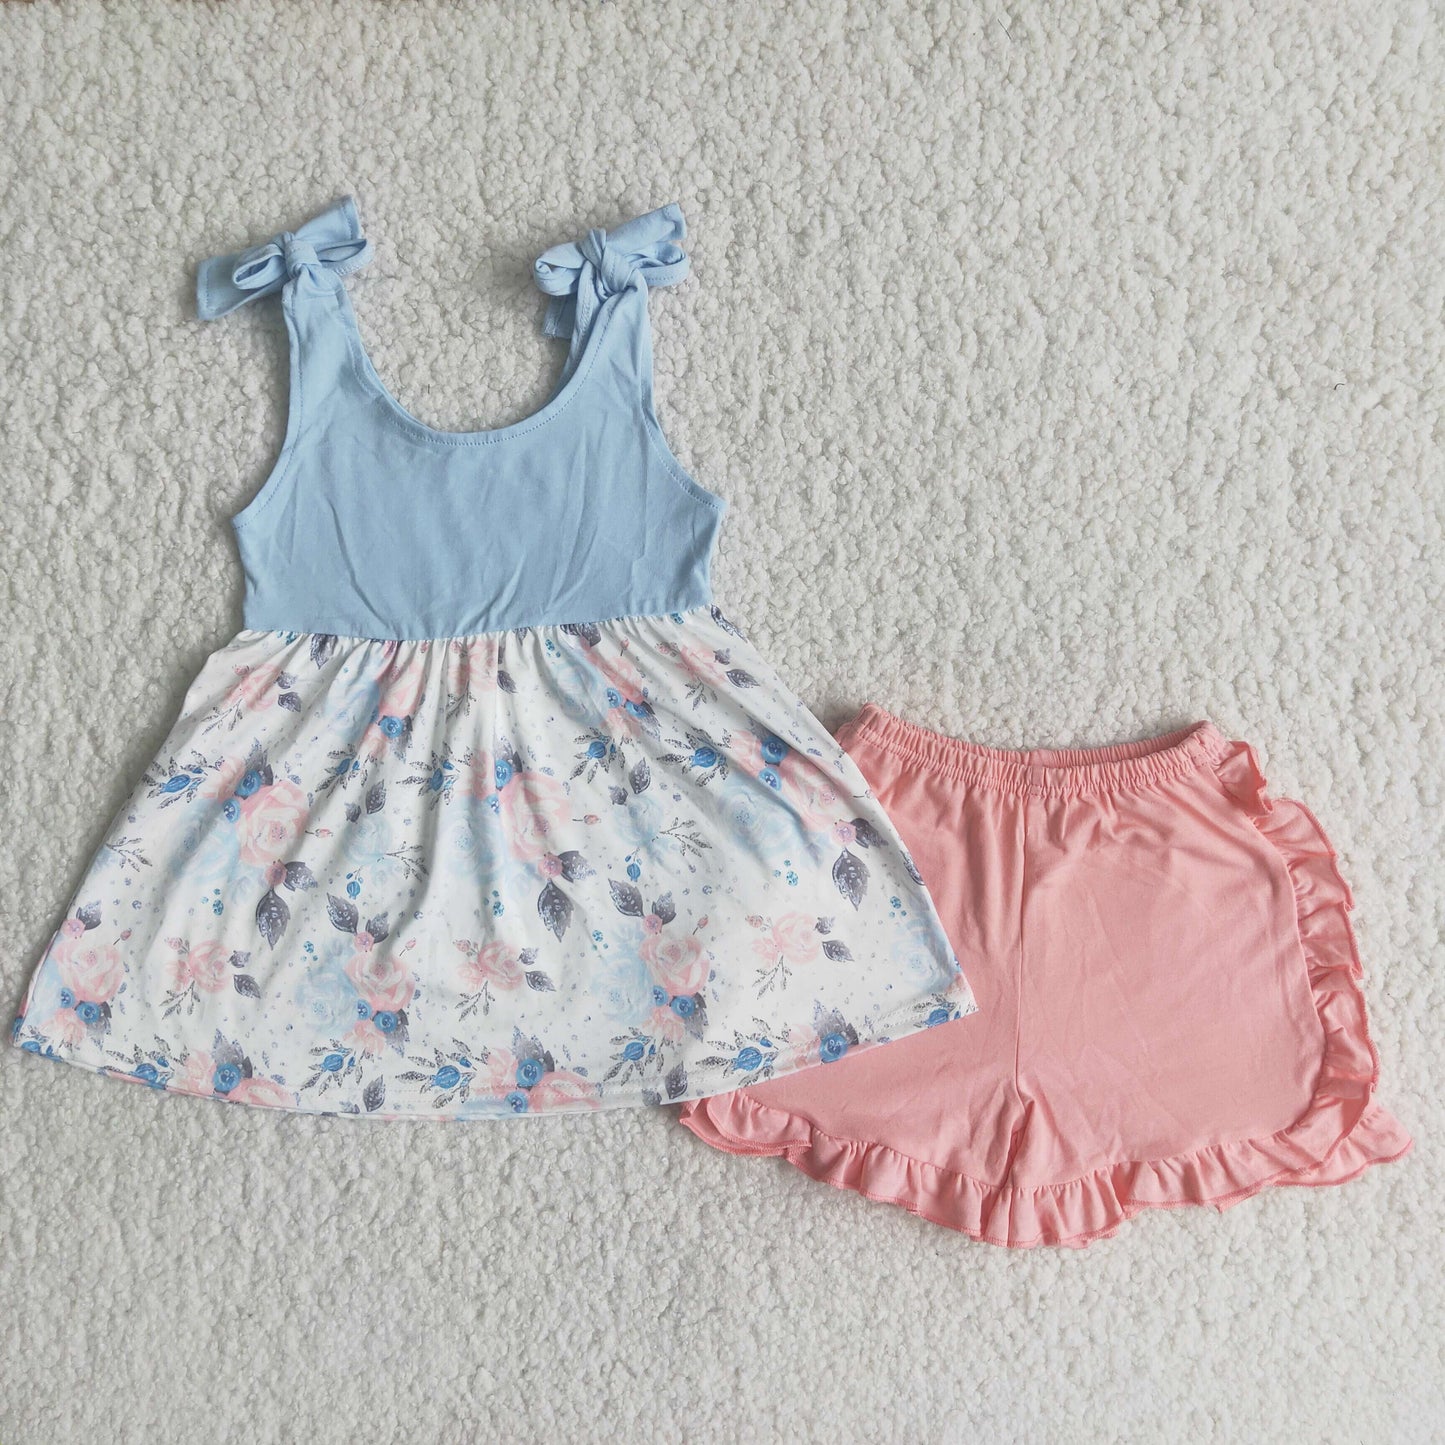 Girls blue floral strapes top ruffle shorts outfit